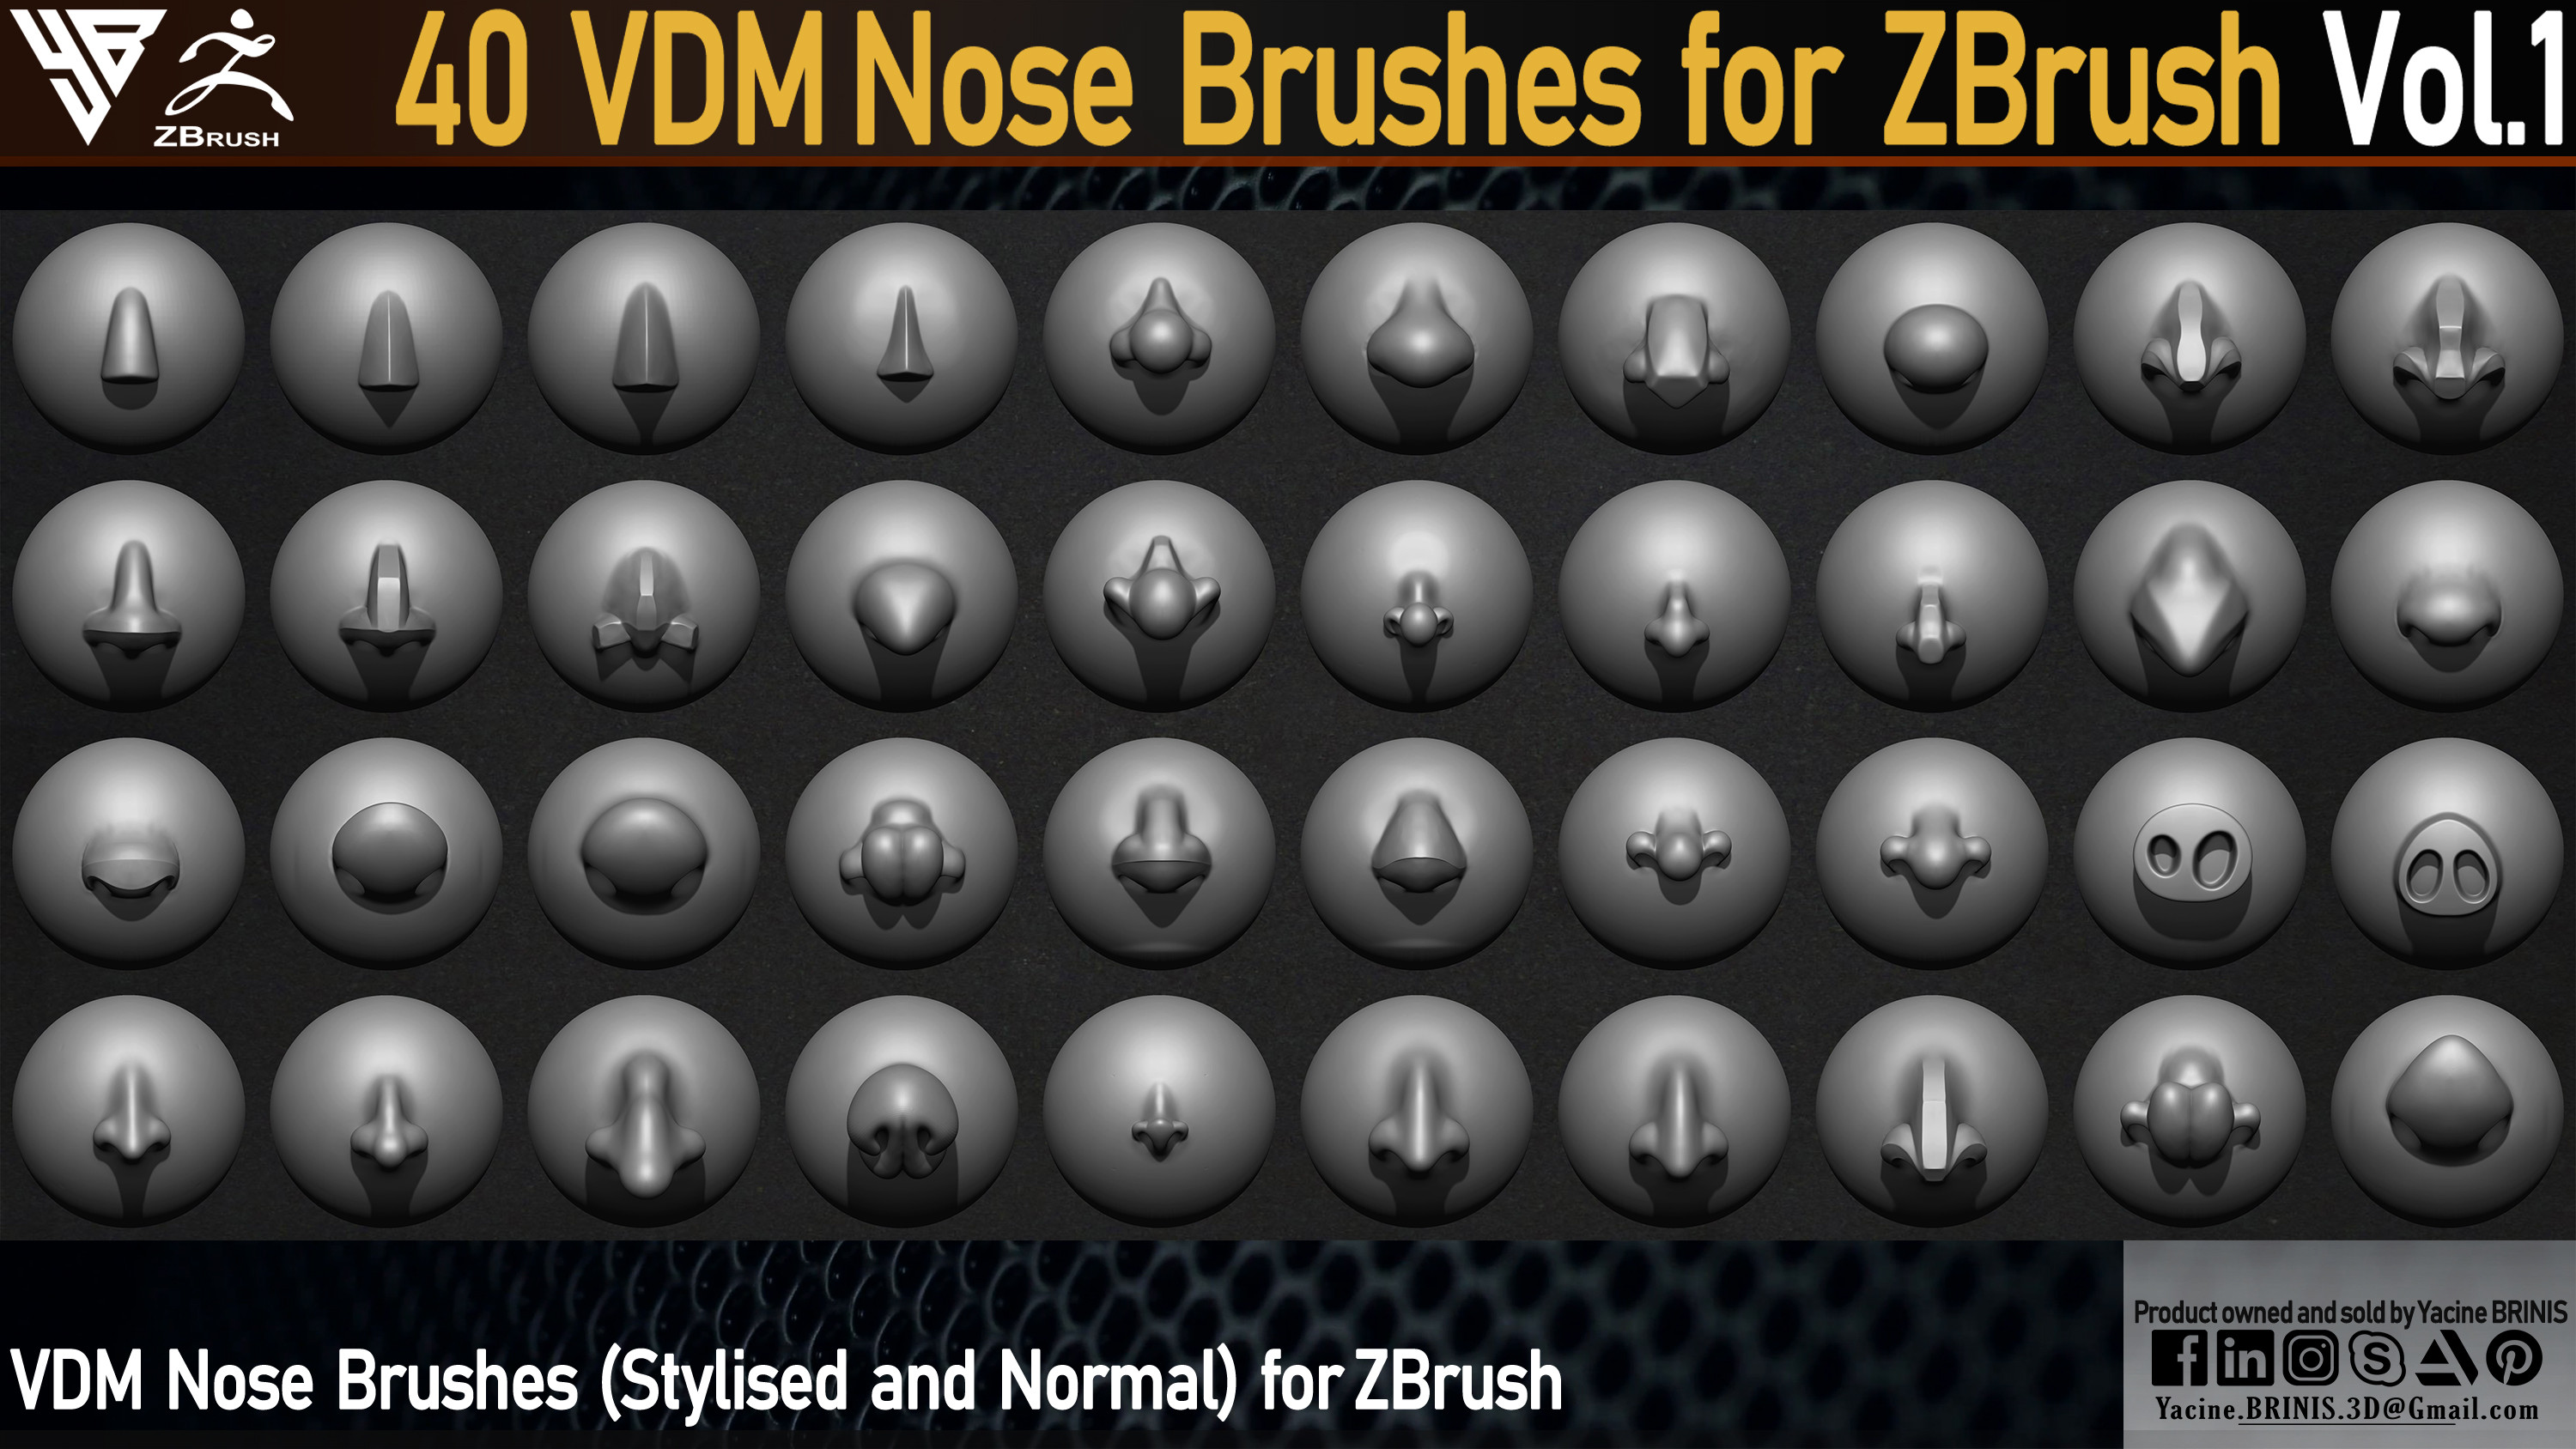 40 VDM Nose Brushes for ZBrush Vol 01 (Stylised and Normal) by Yacine BRINIS Set 04